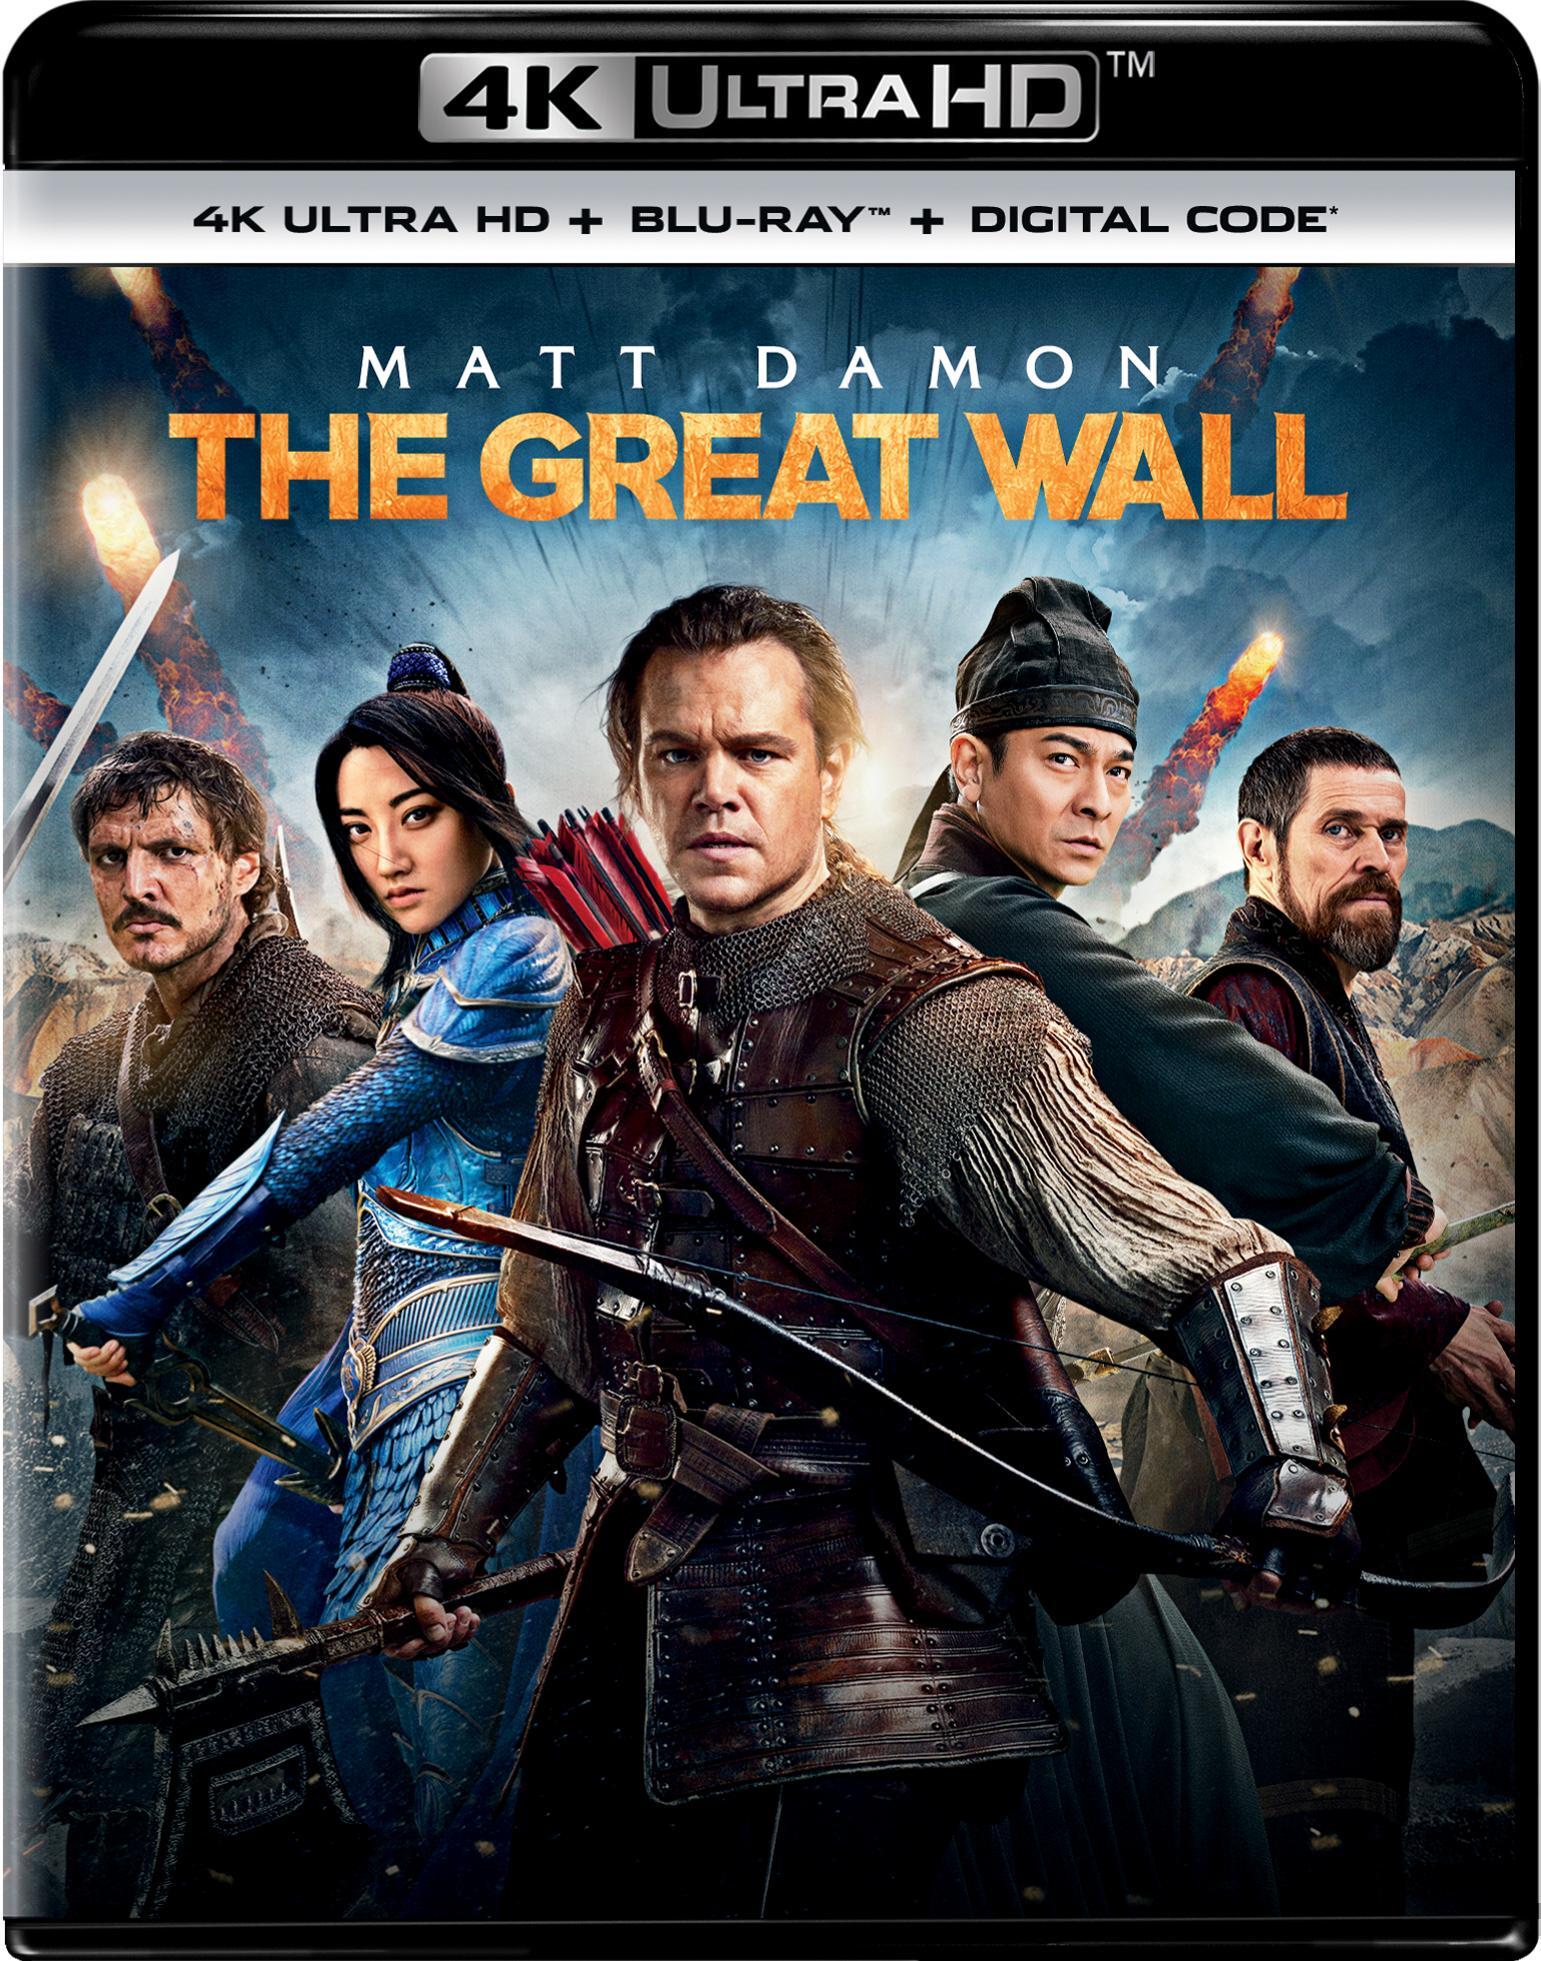 The Great Wall (4K Ultra HD) - UHD [ 2017 ]  - Action Movies On 4K Ultra HD Blu-ray - Movies On GRUV